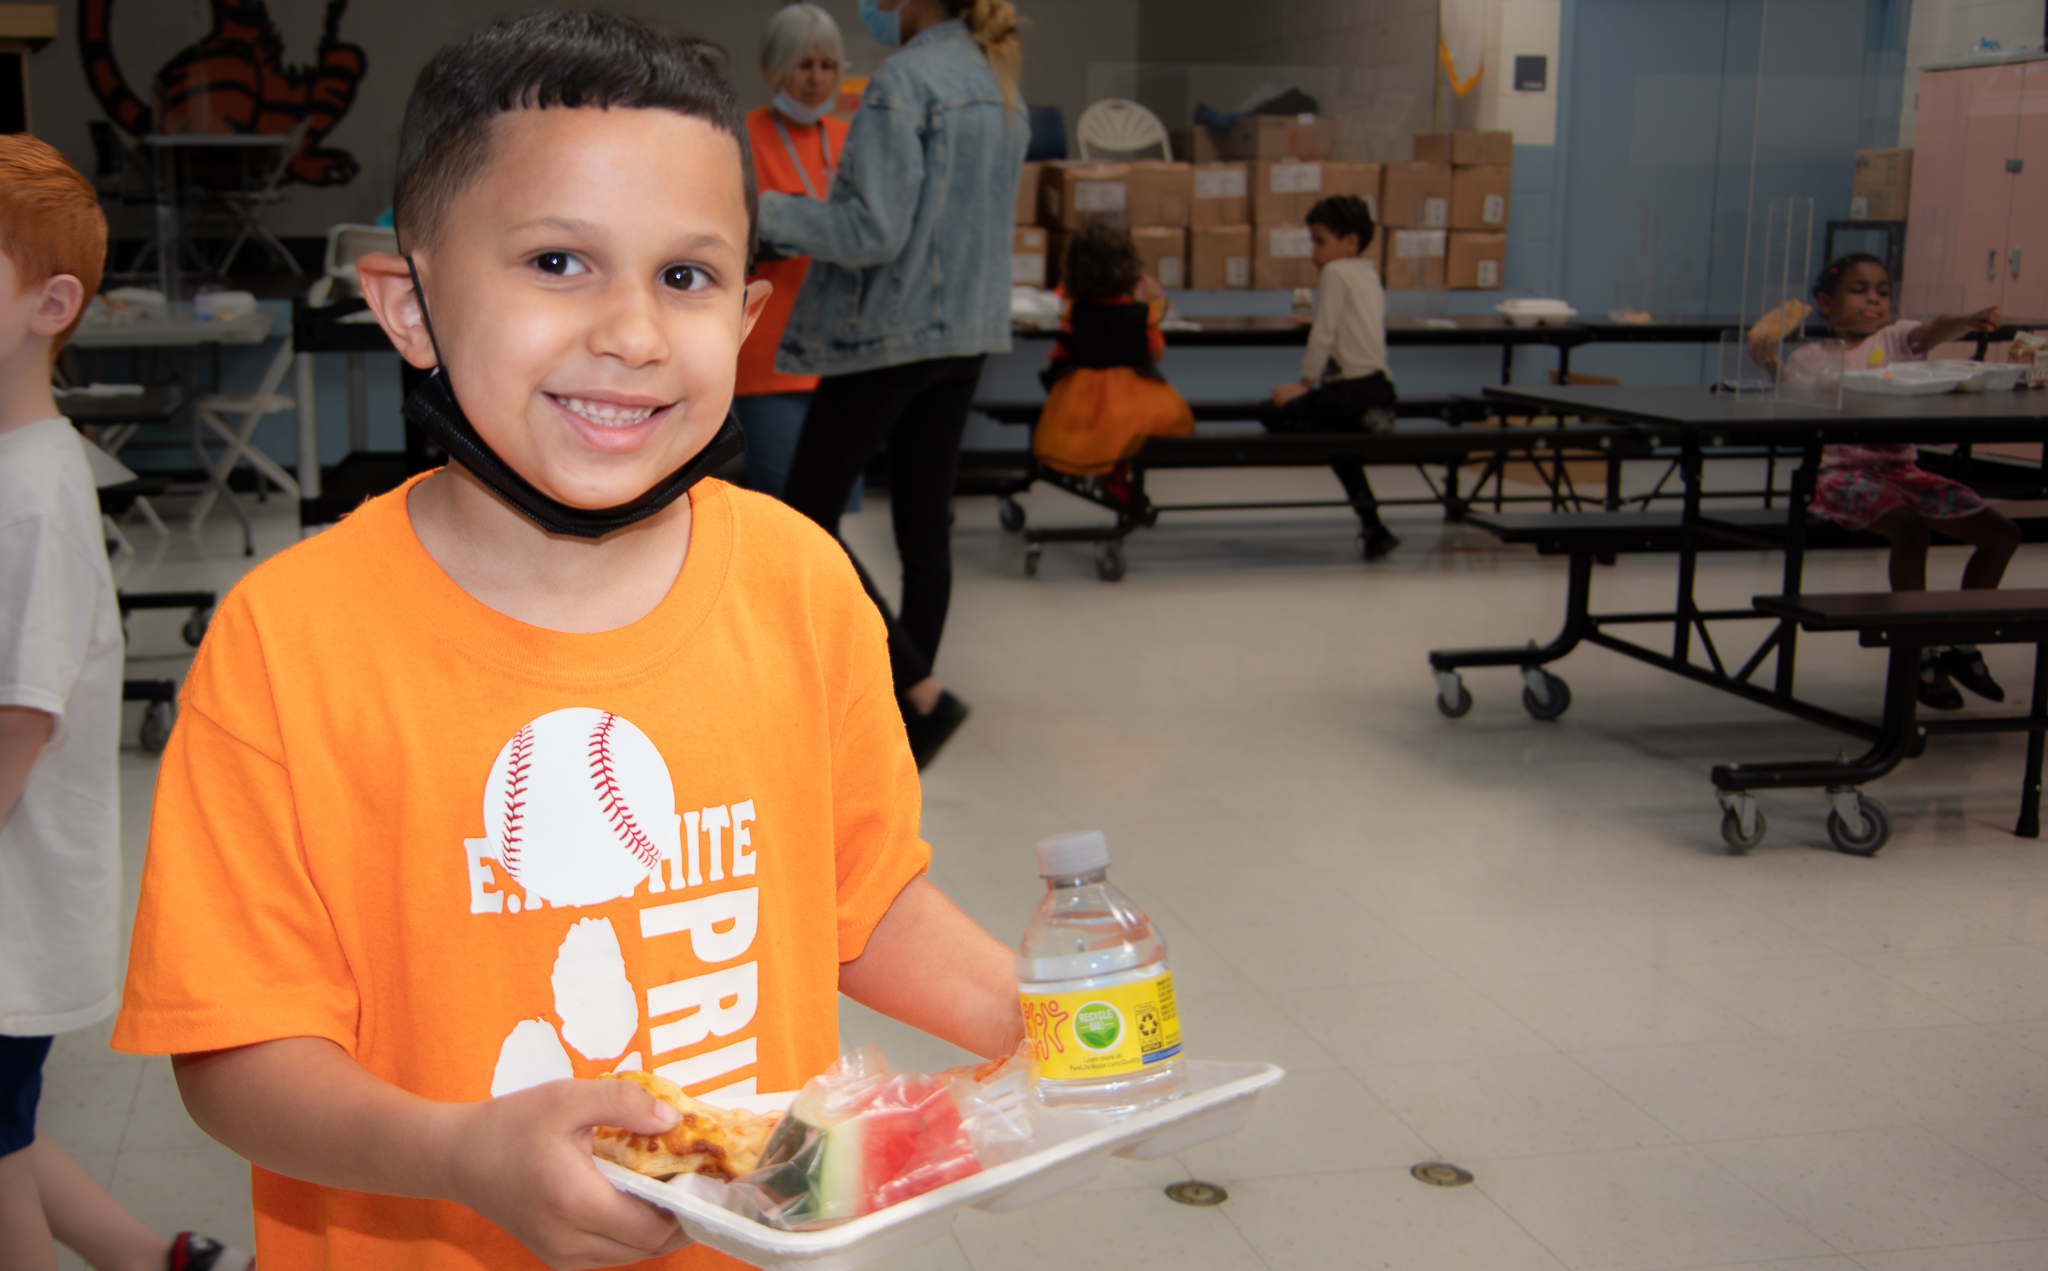 Student smiling for the camera at a school cafeteria holding a food tray with lunch.